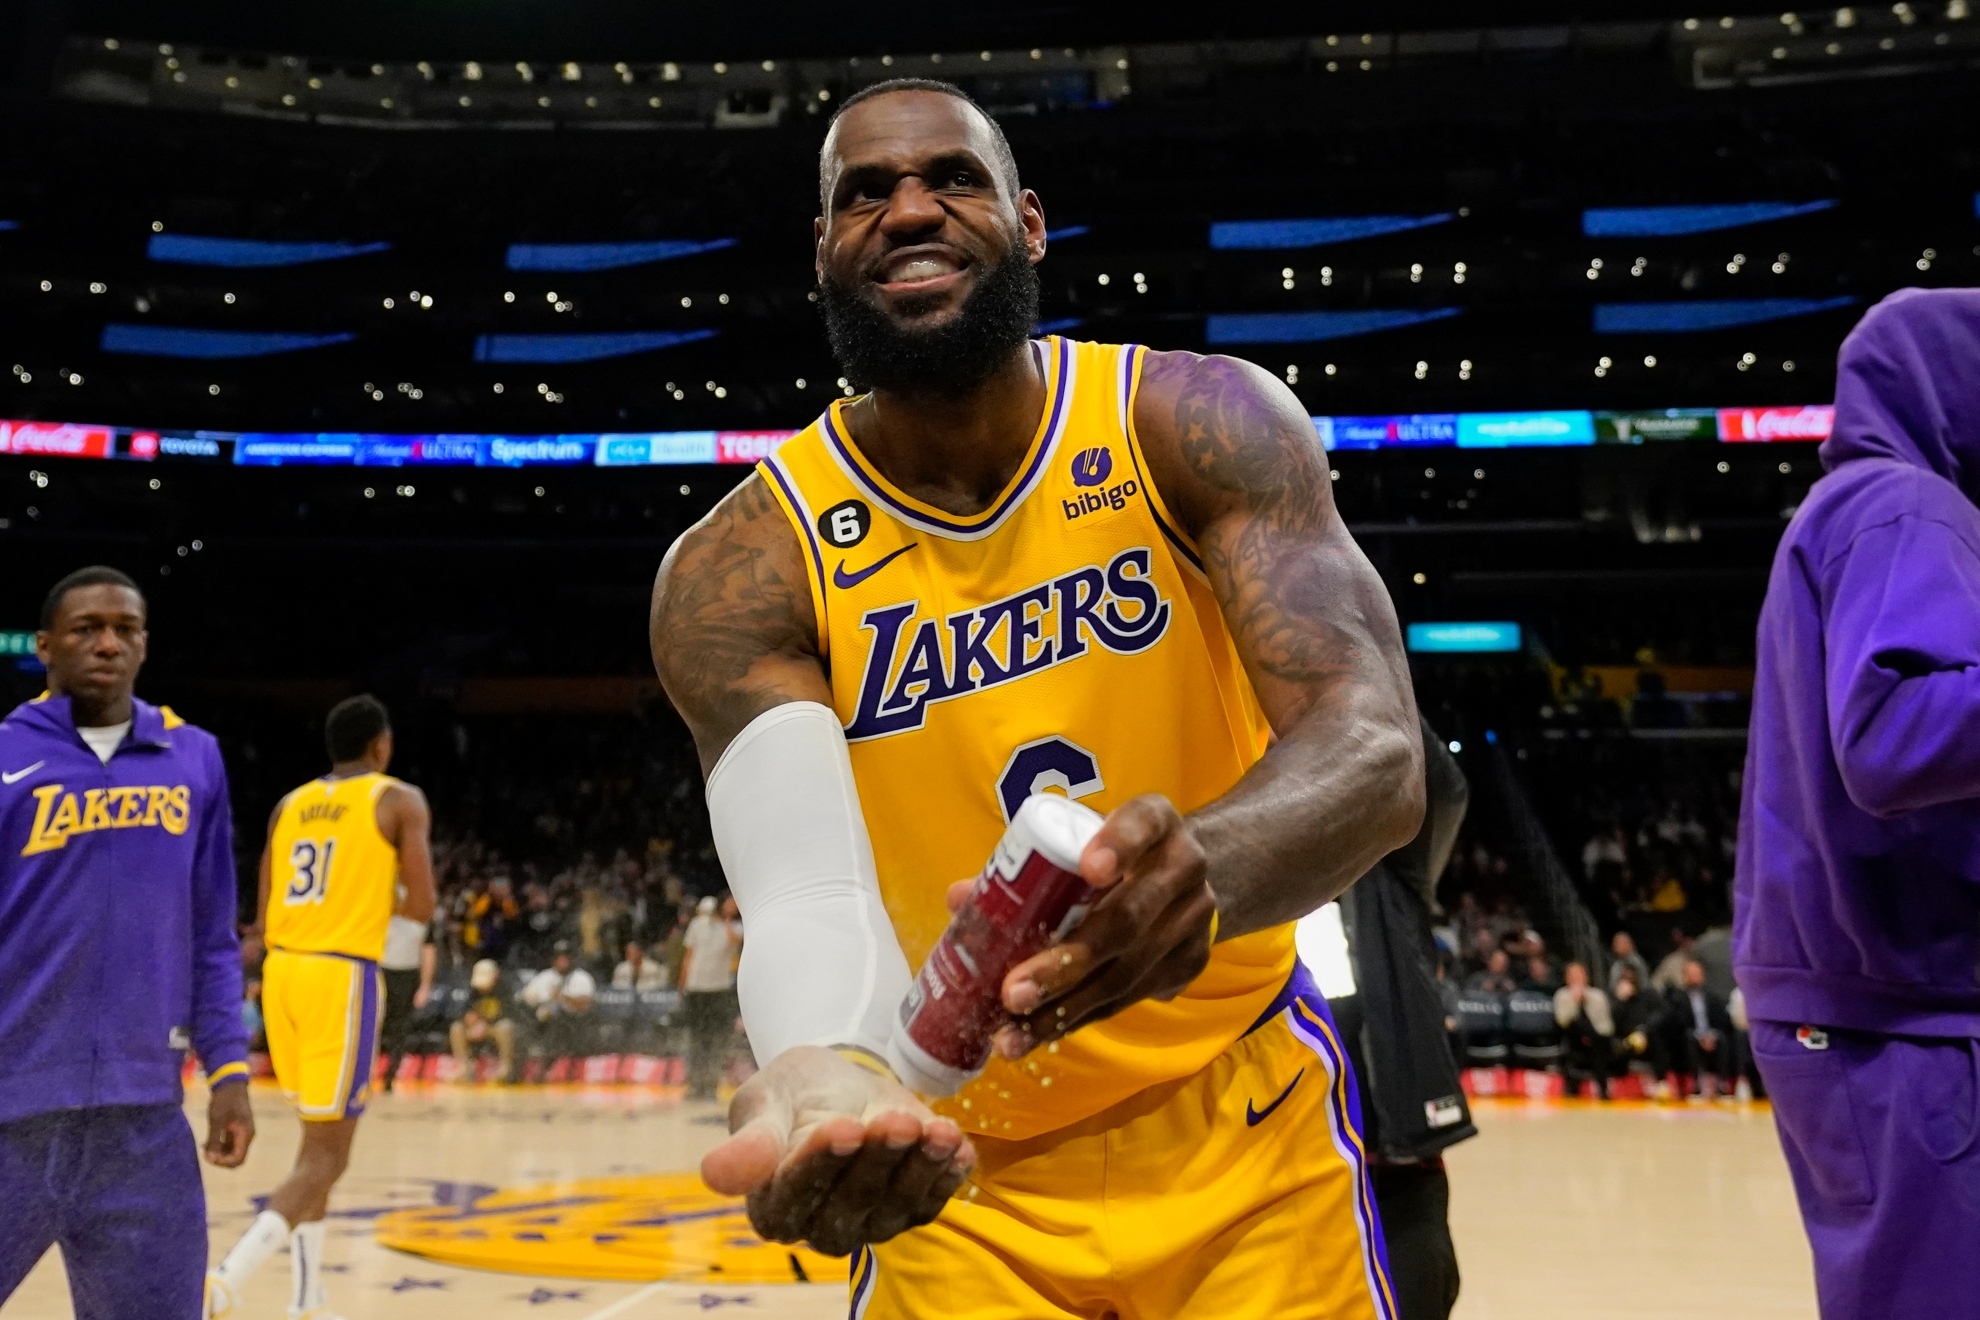 LeBron James playing with Los Angeles Lakers